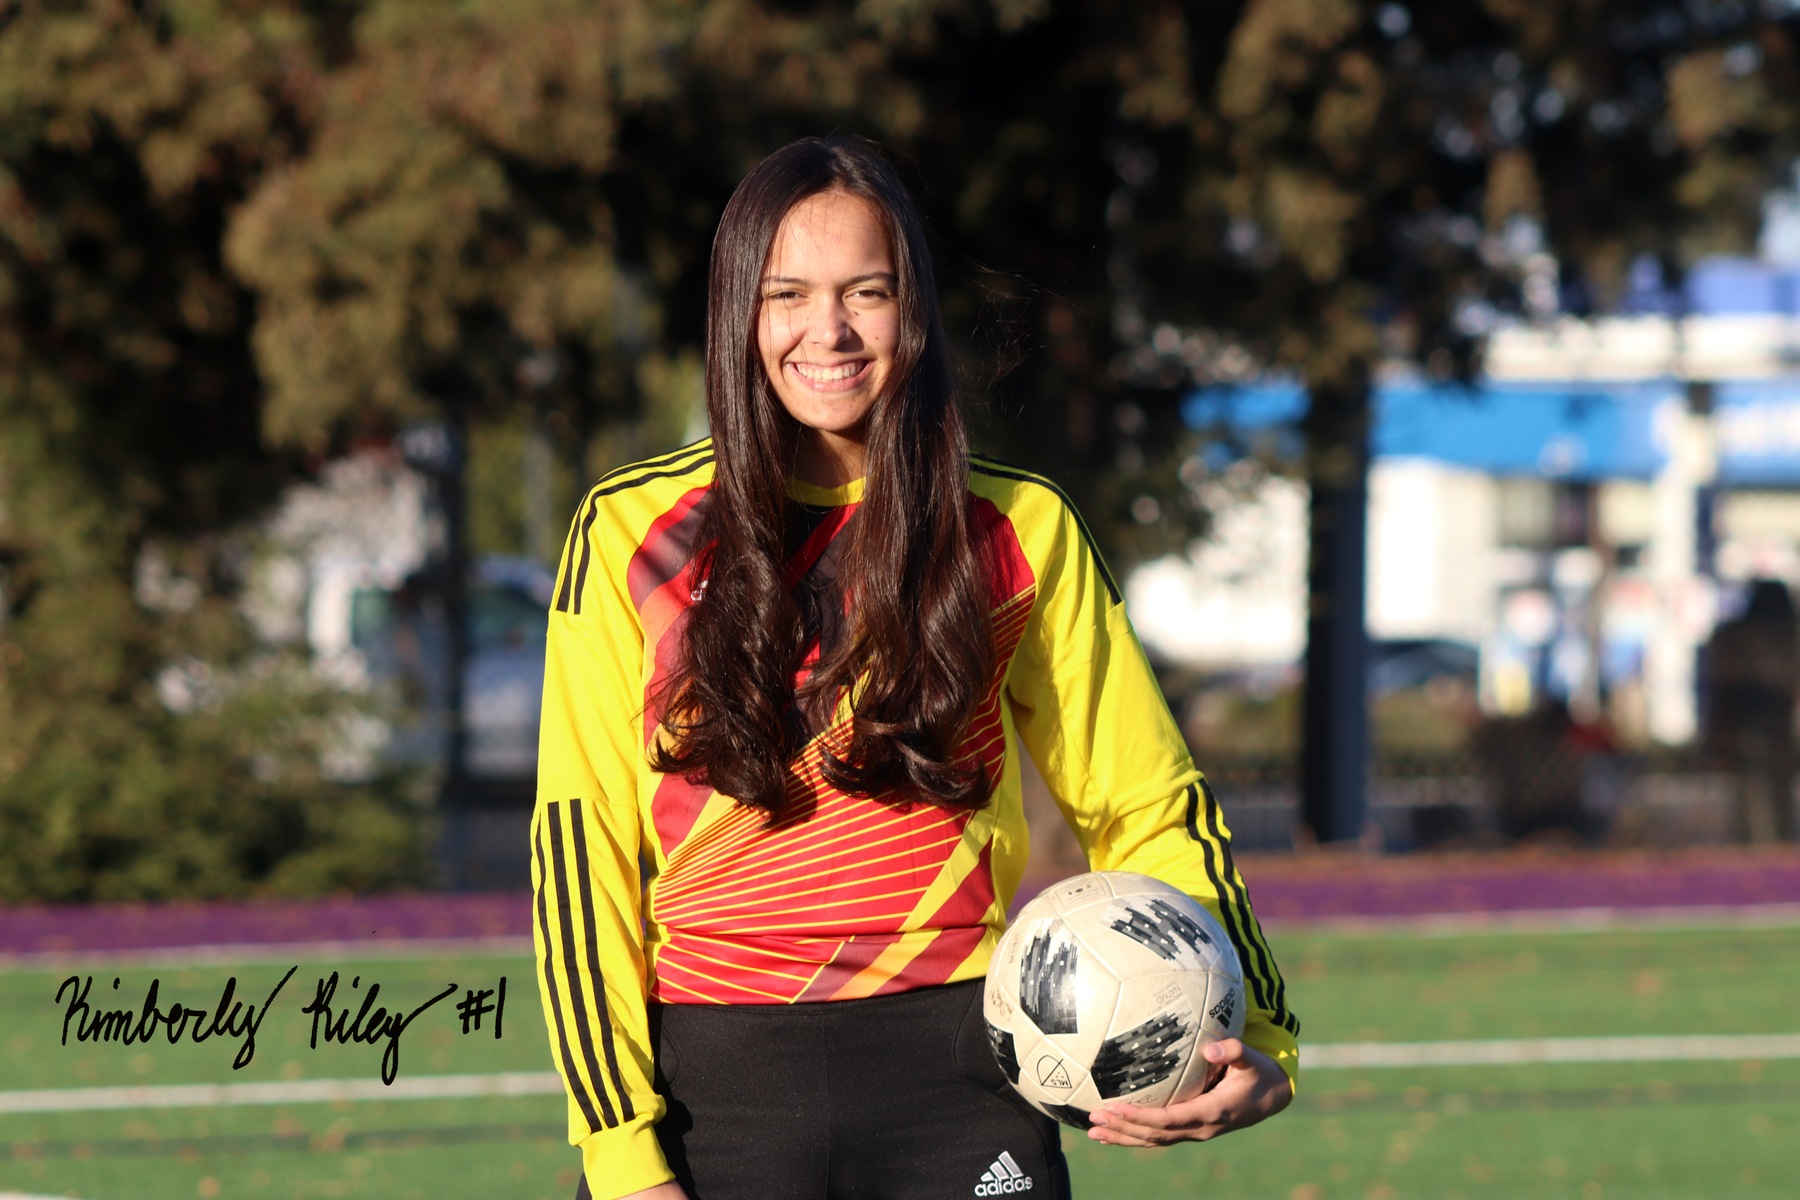 Get to Know: Soccer's #1 Kimberly Riley